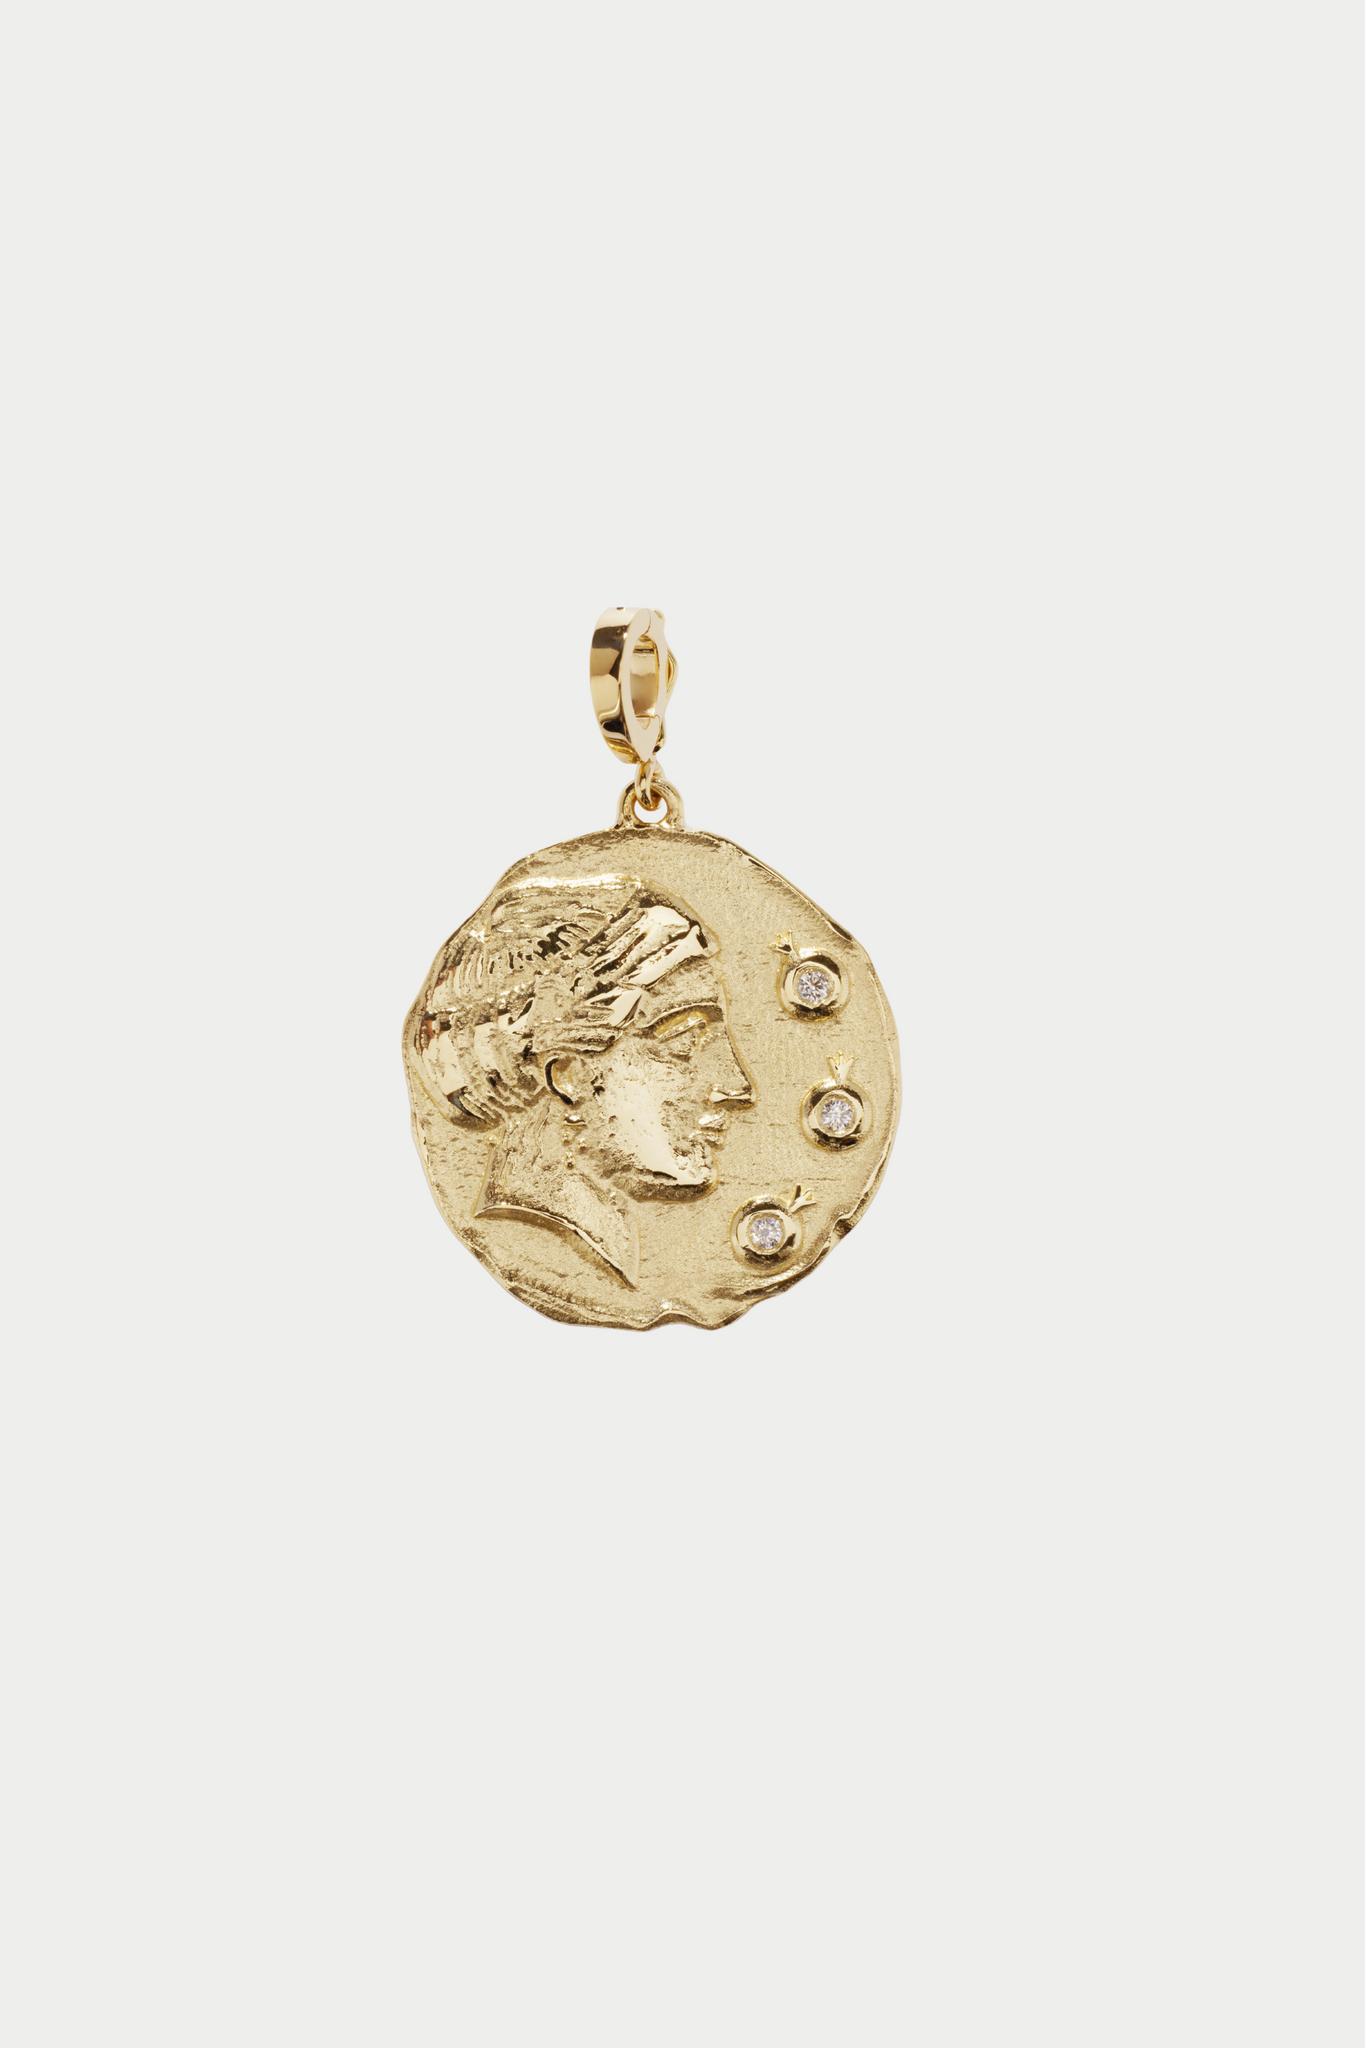 AZLEE - Hera Goddess Mother Large Coin, Yellow Gold